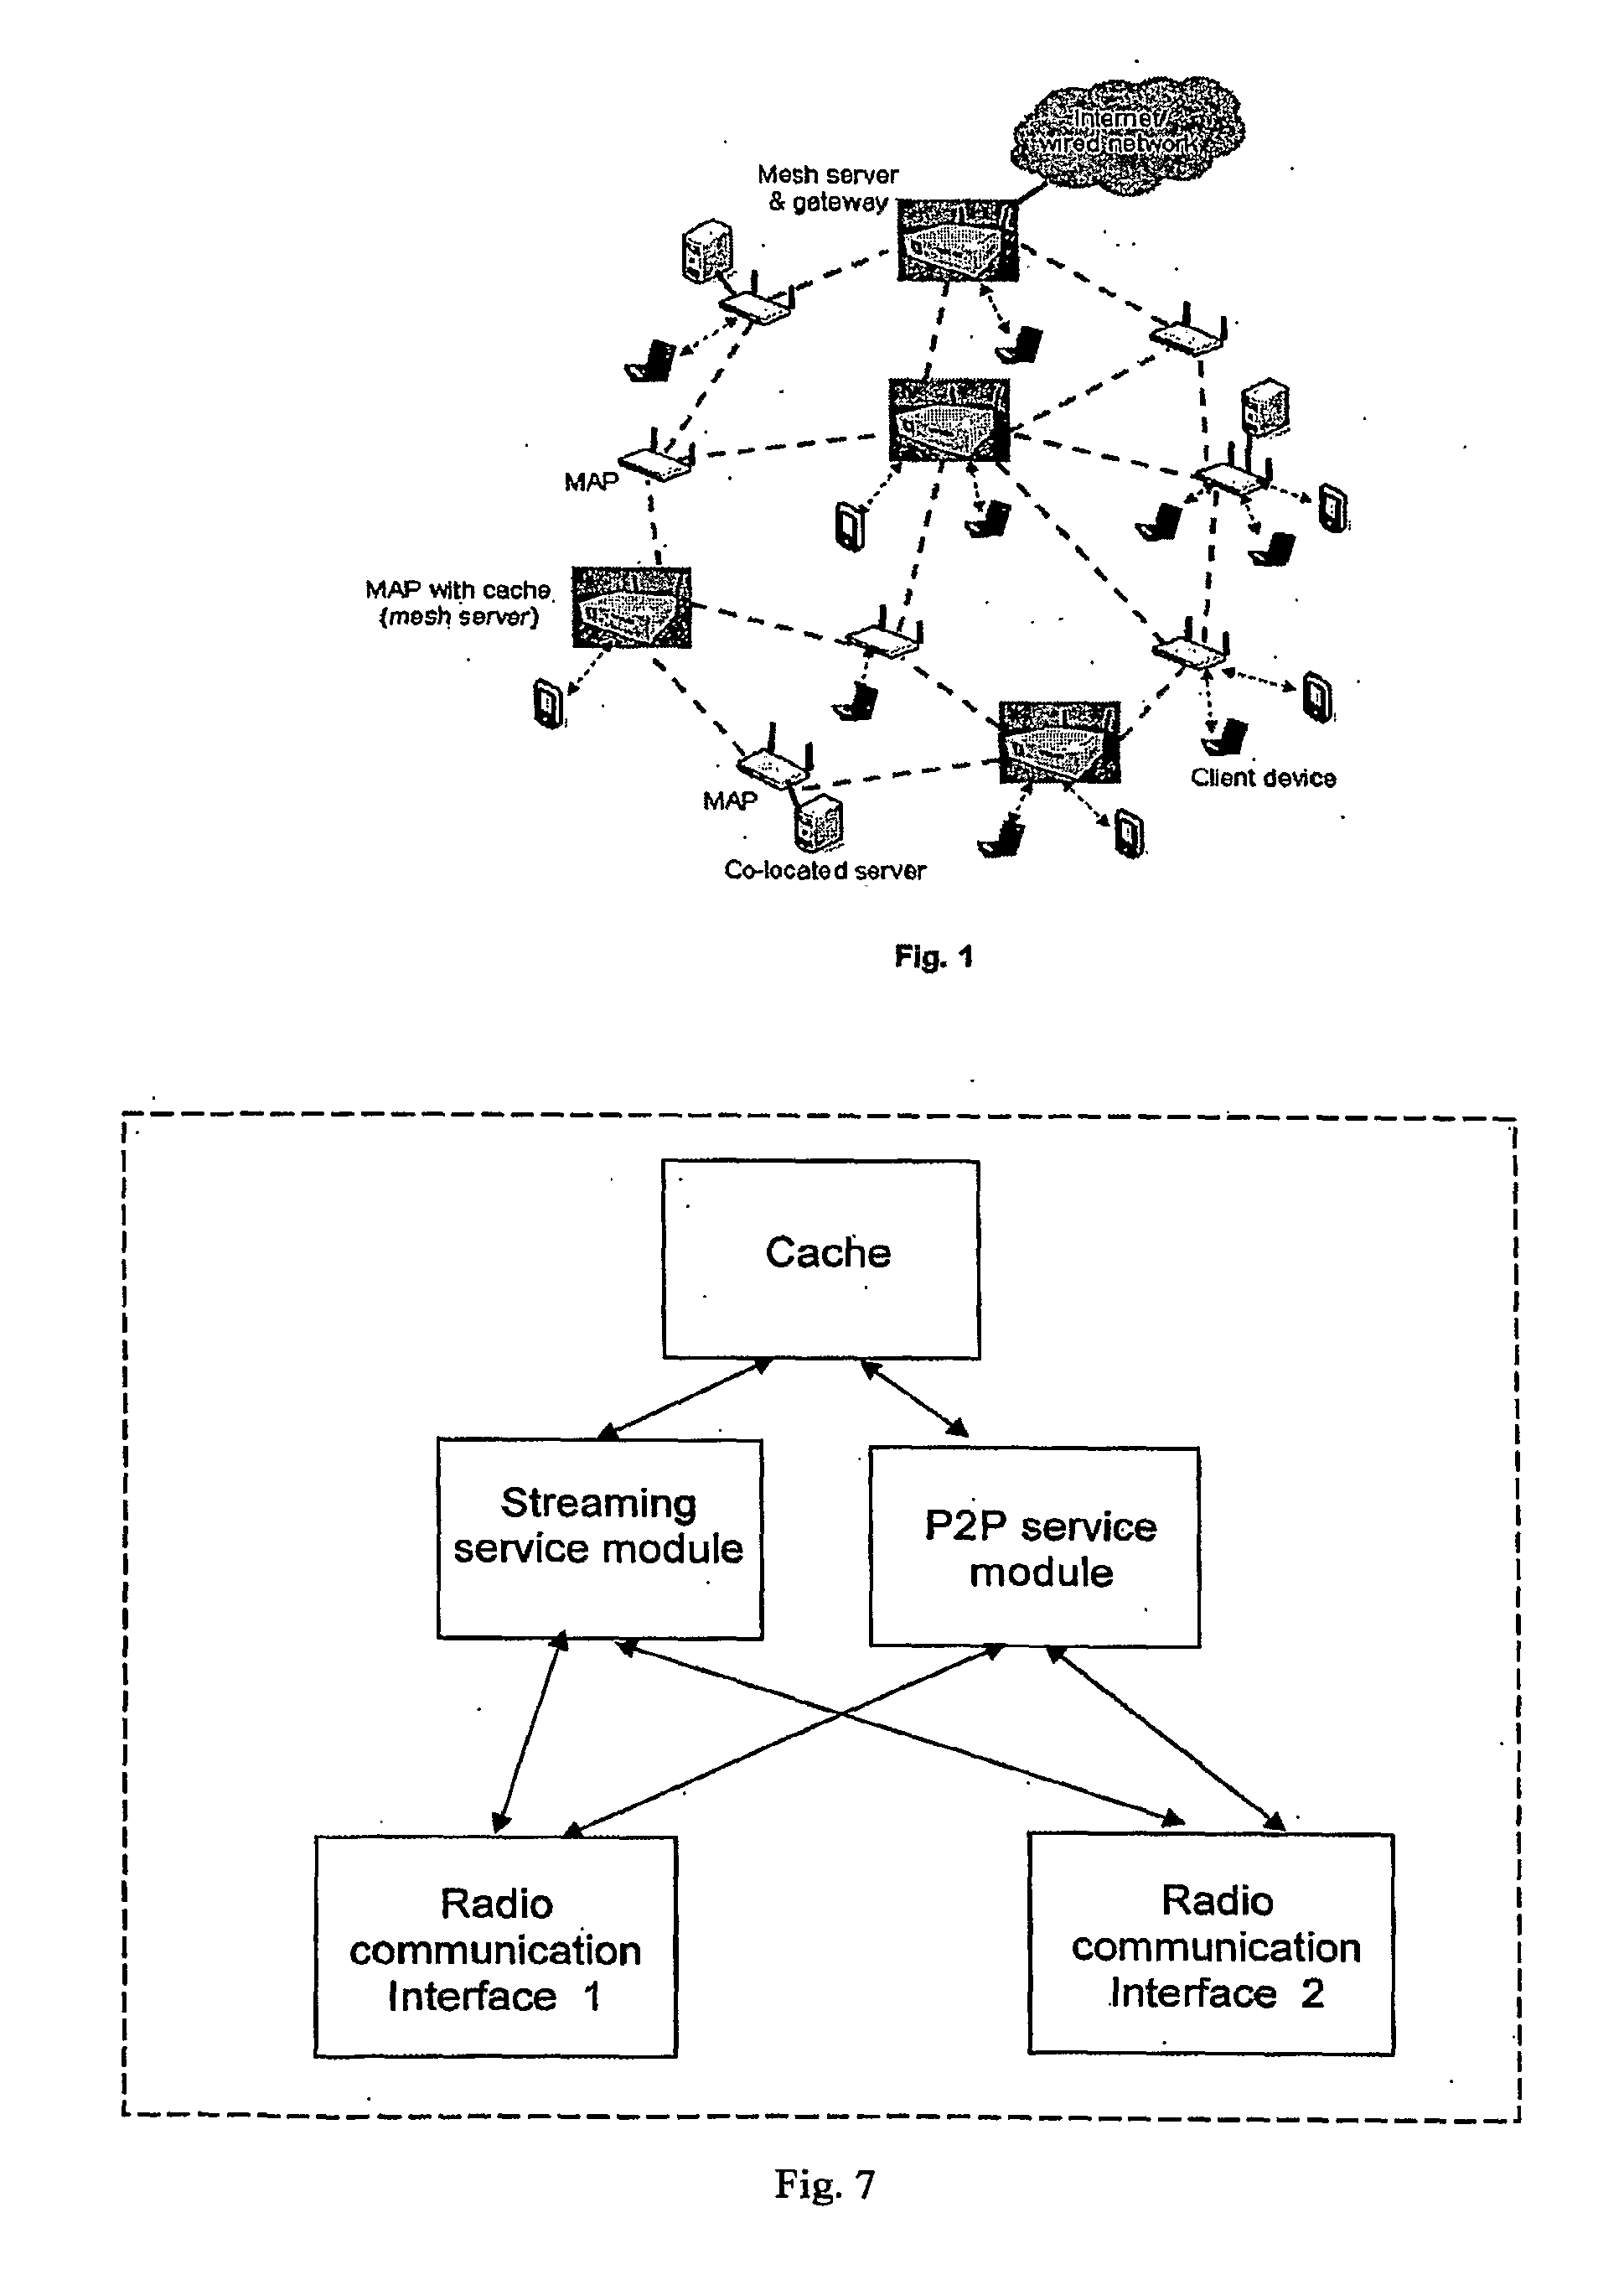 Unified peer-to-peer and cache system for content services in wireless mesh networks